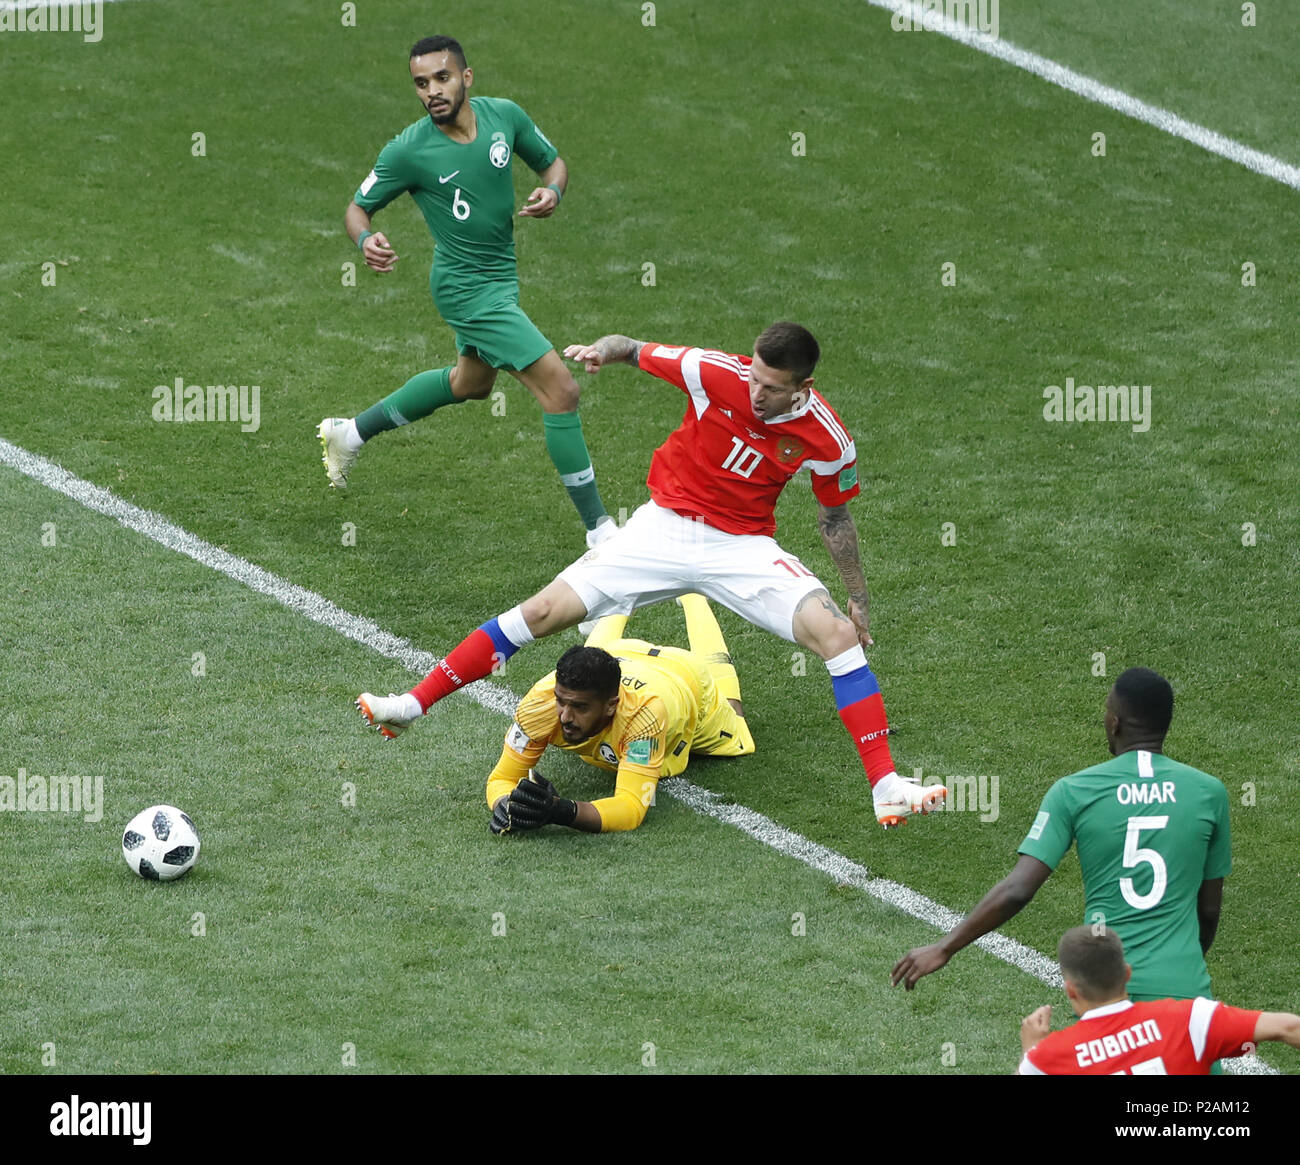 Moscow, Russia. 14th June, 2018. Russia's Fedor Smolov (C) competes during the opening match against Saudi Arabia at the 2018 FIFA World Cup in Moscow, Russia, on June 14, 2018. Credit: Cao Can/Xinhua/Alamy Live News Stock Photo